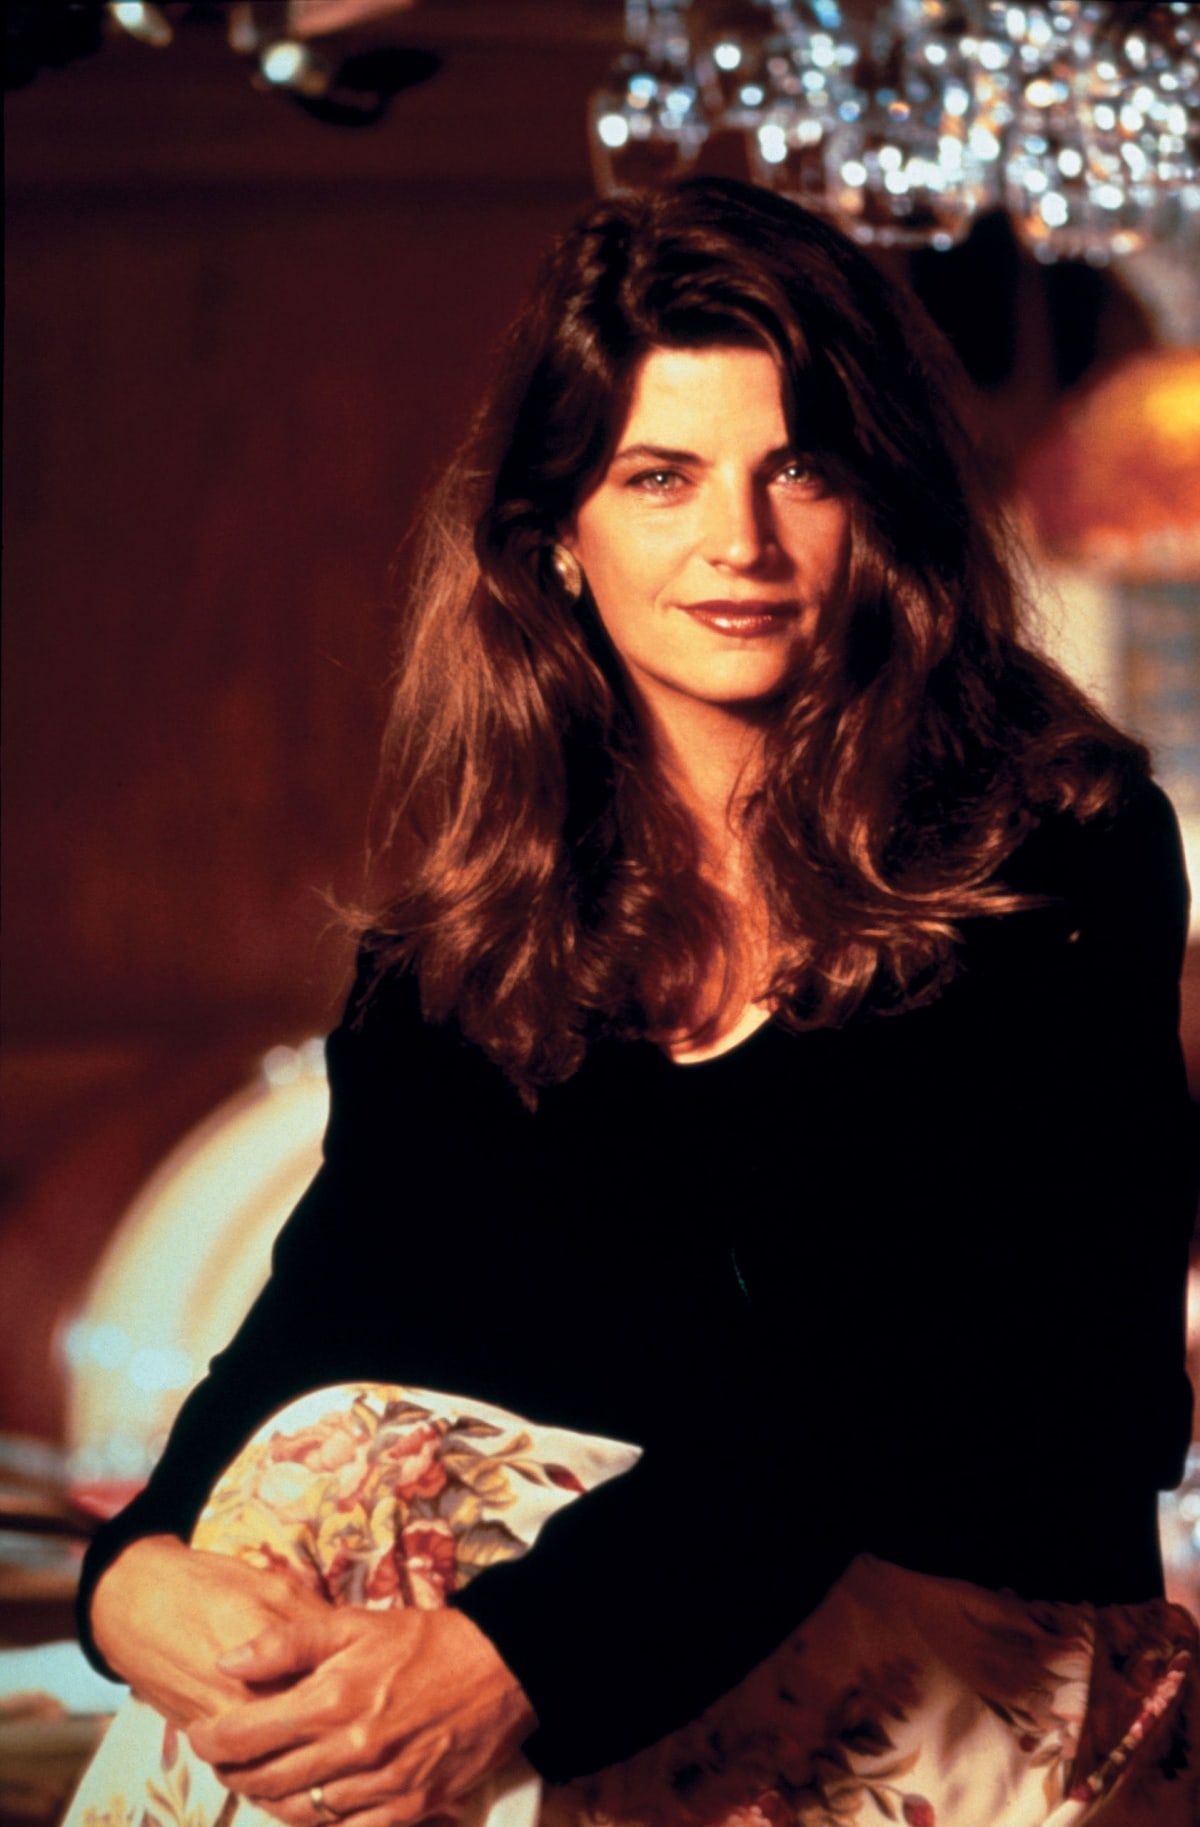 Kirstie Alley as Rebecca Howe in the popular sitcom television series Cheers